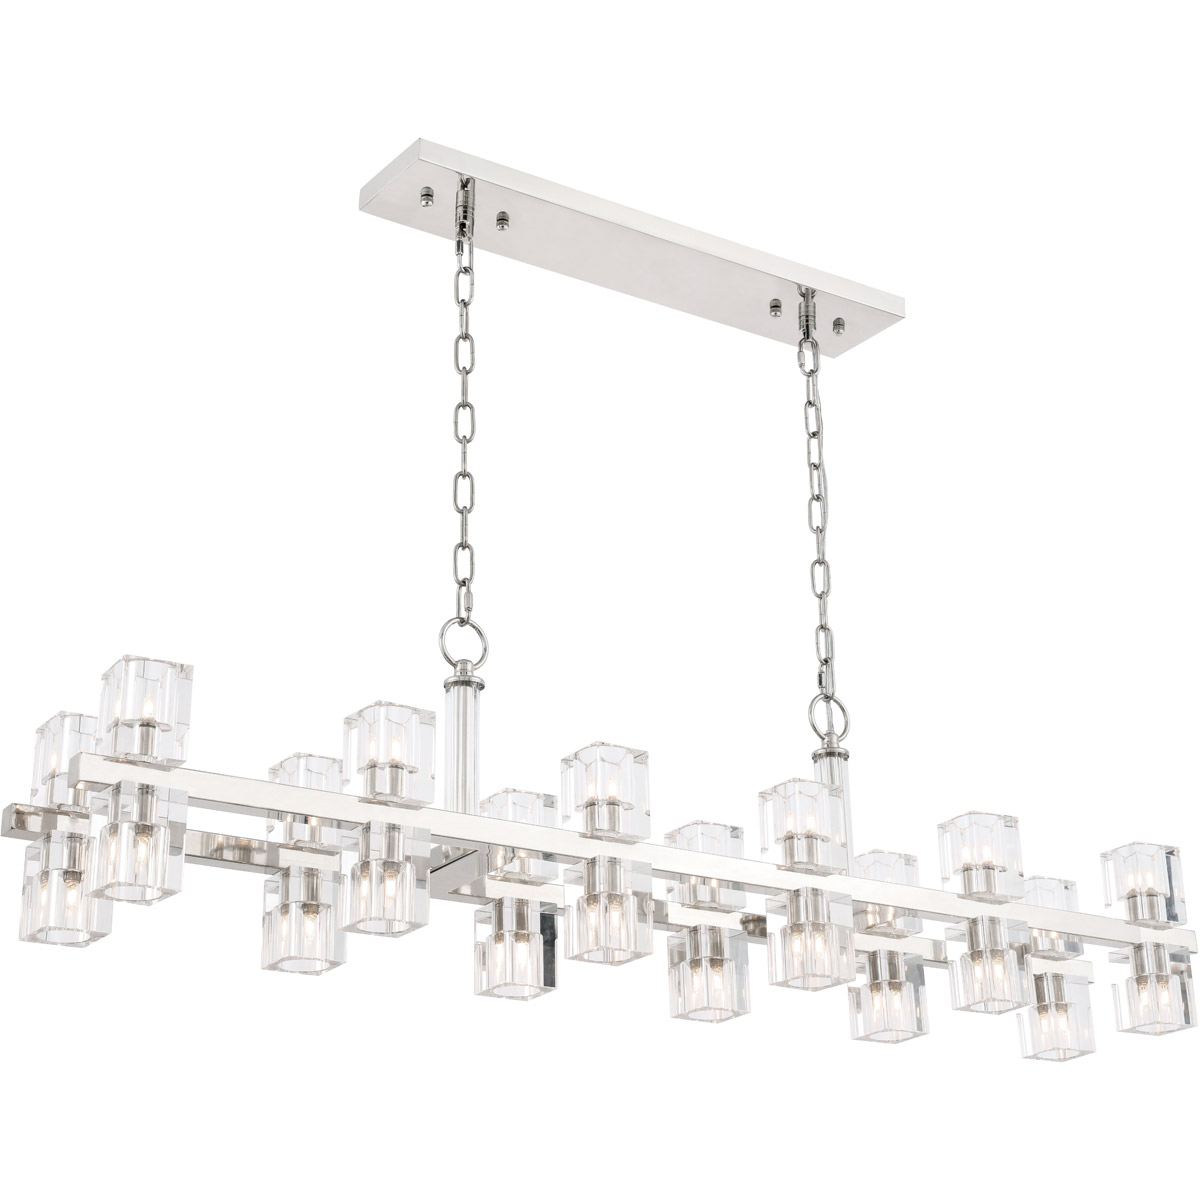 1550d50pn Chateau 24 Light Polished Nickel Ceiling Pendant